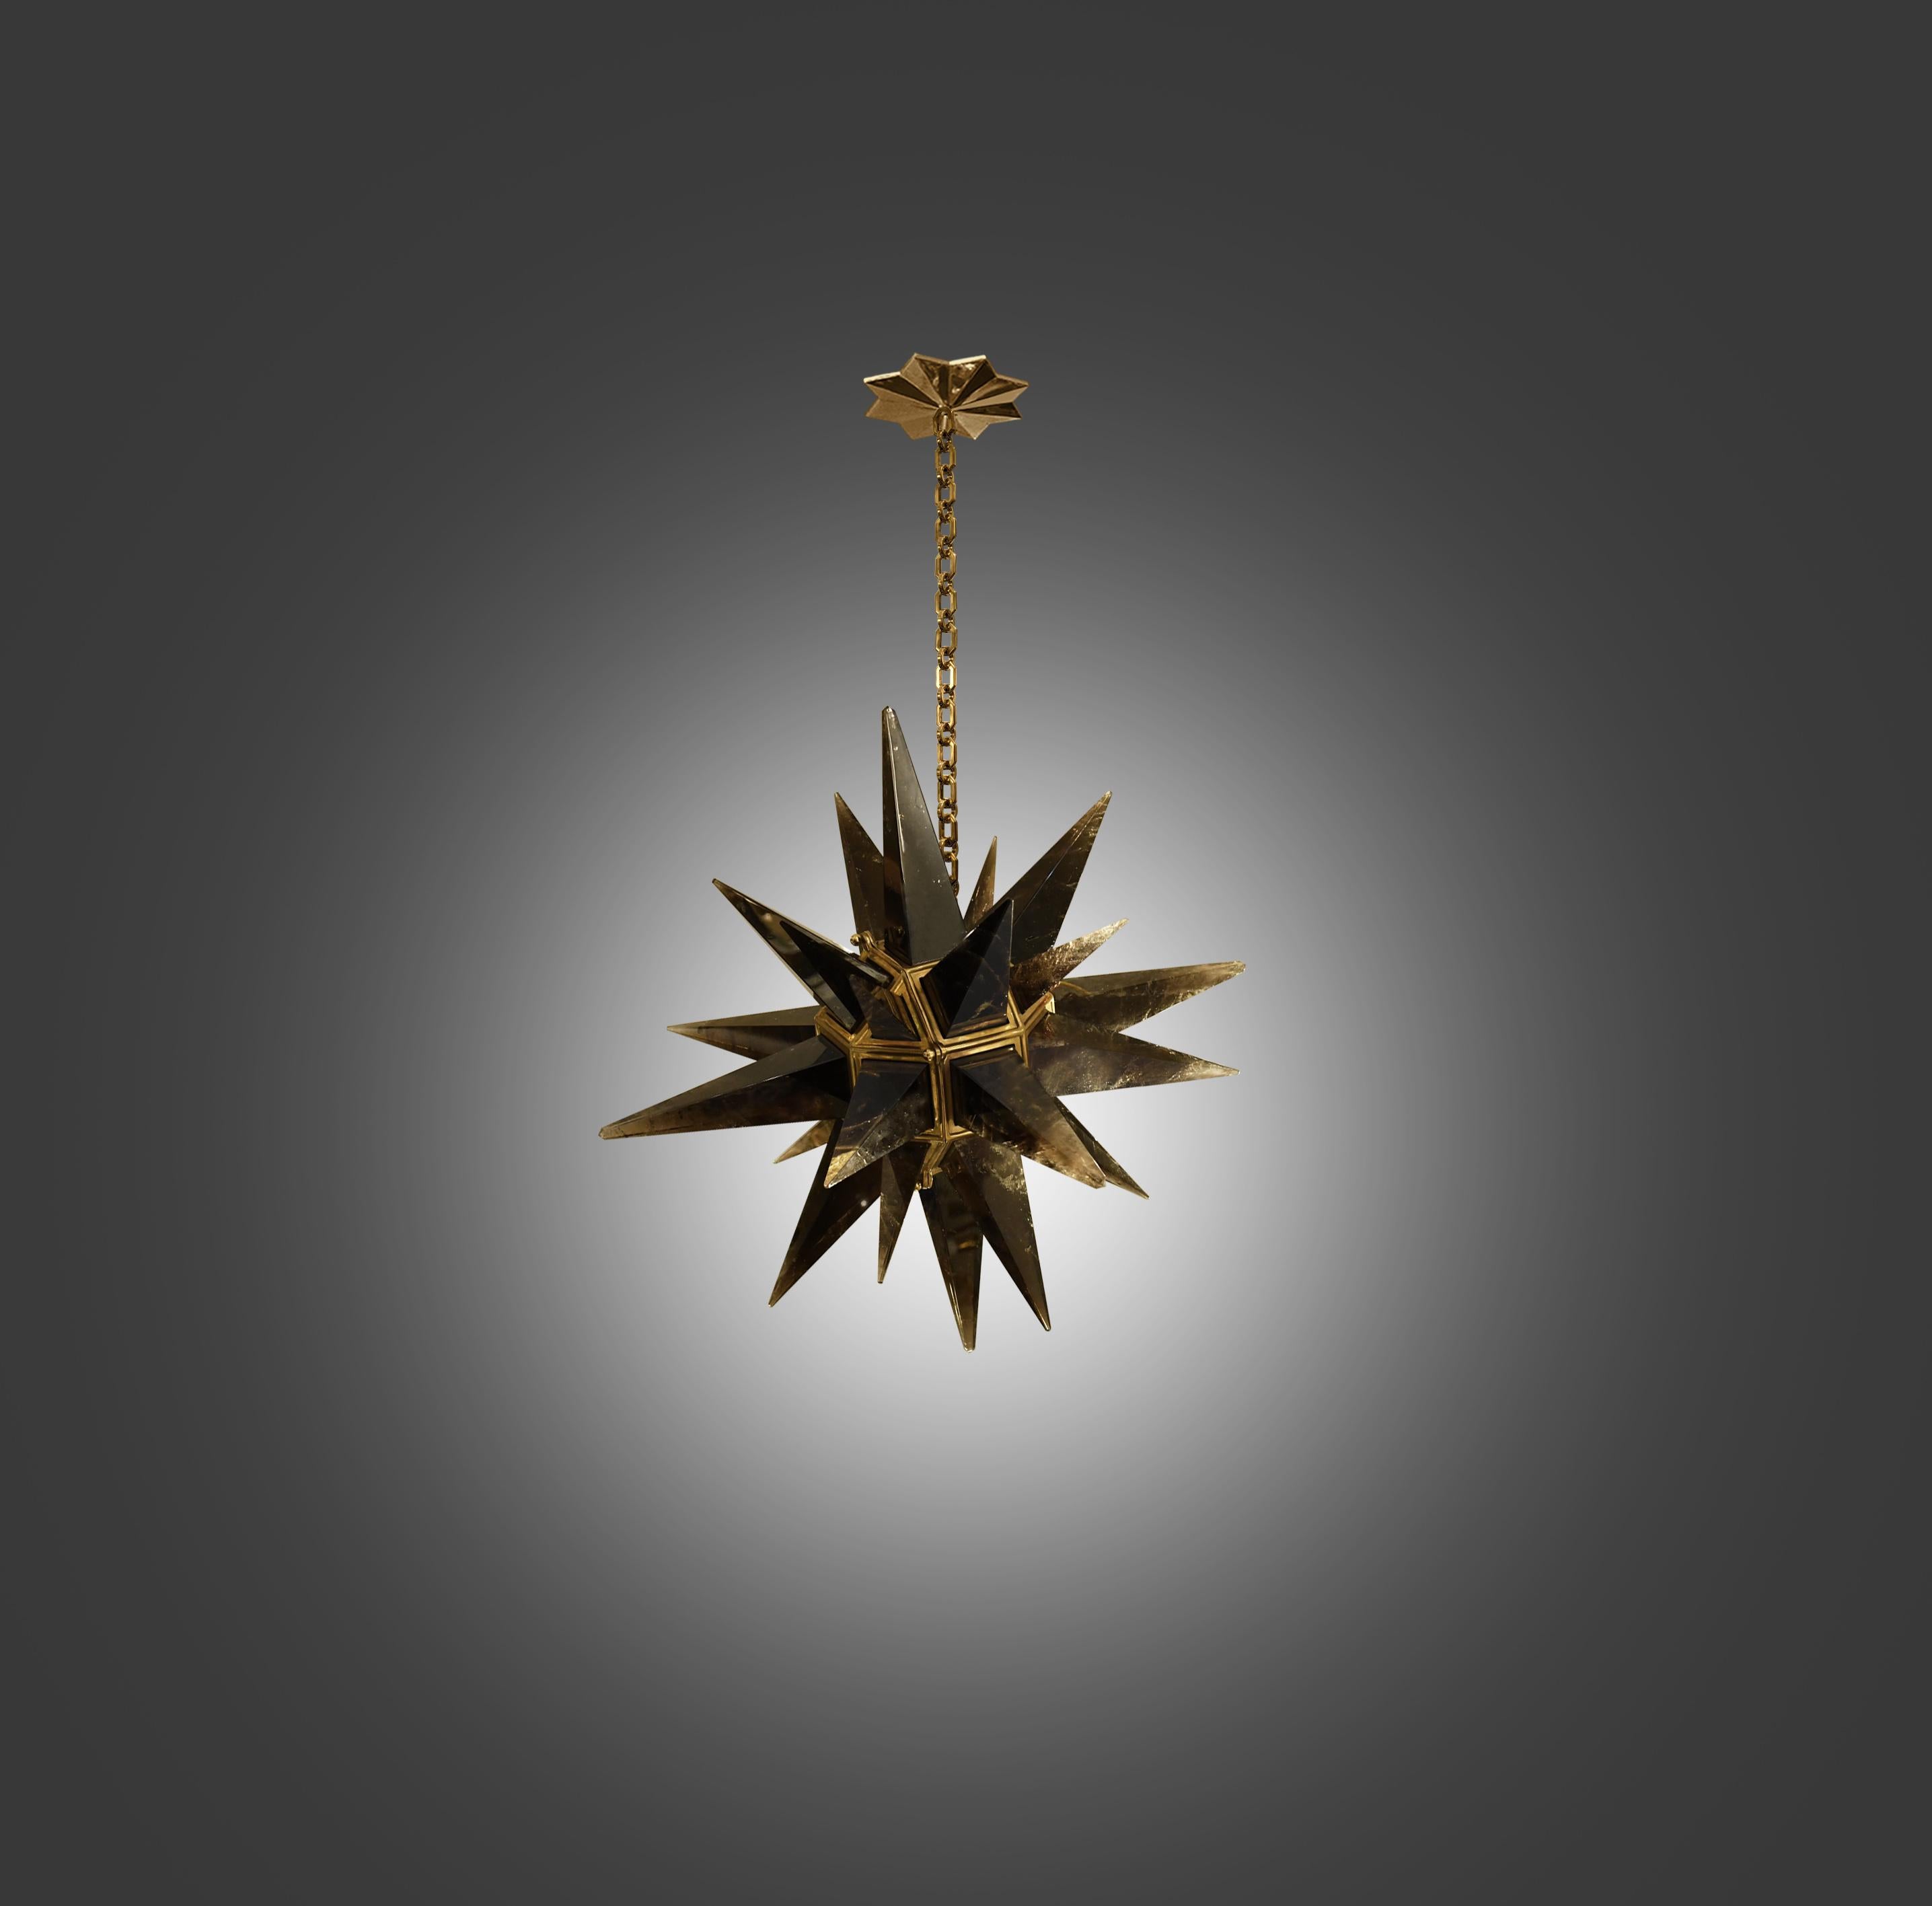 A modern dark brown rock crystal star chandelier with aged brass frame. Created by Phoenix Gallery, NYC.
The chandelier is 24.5